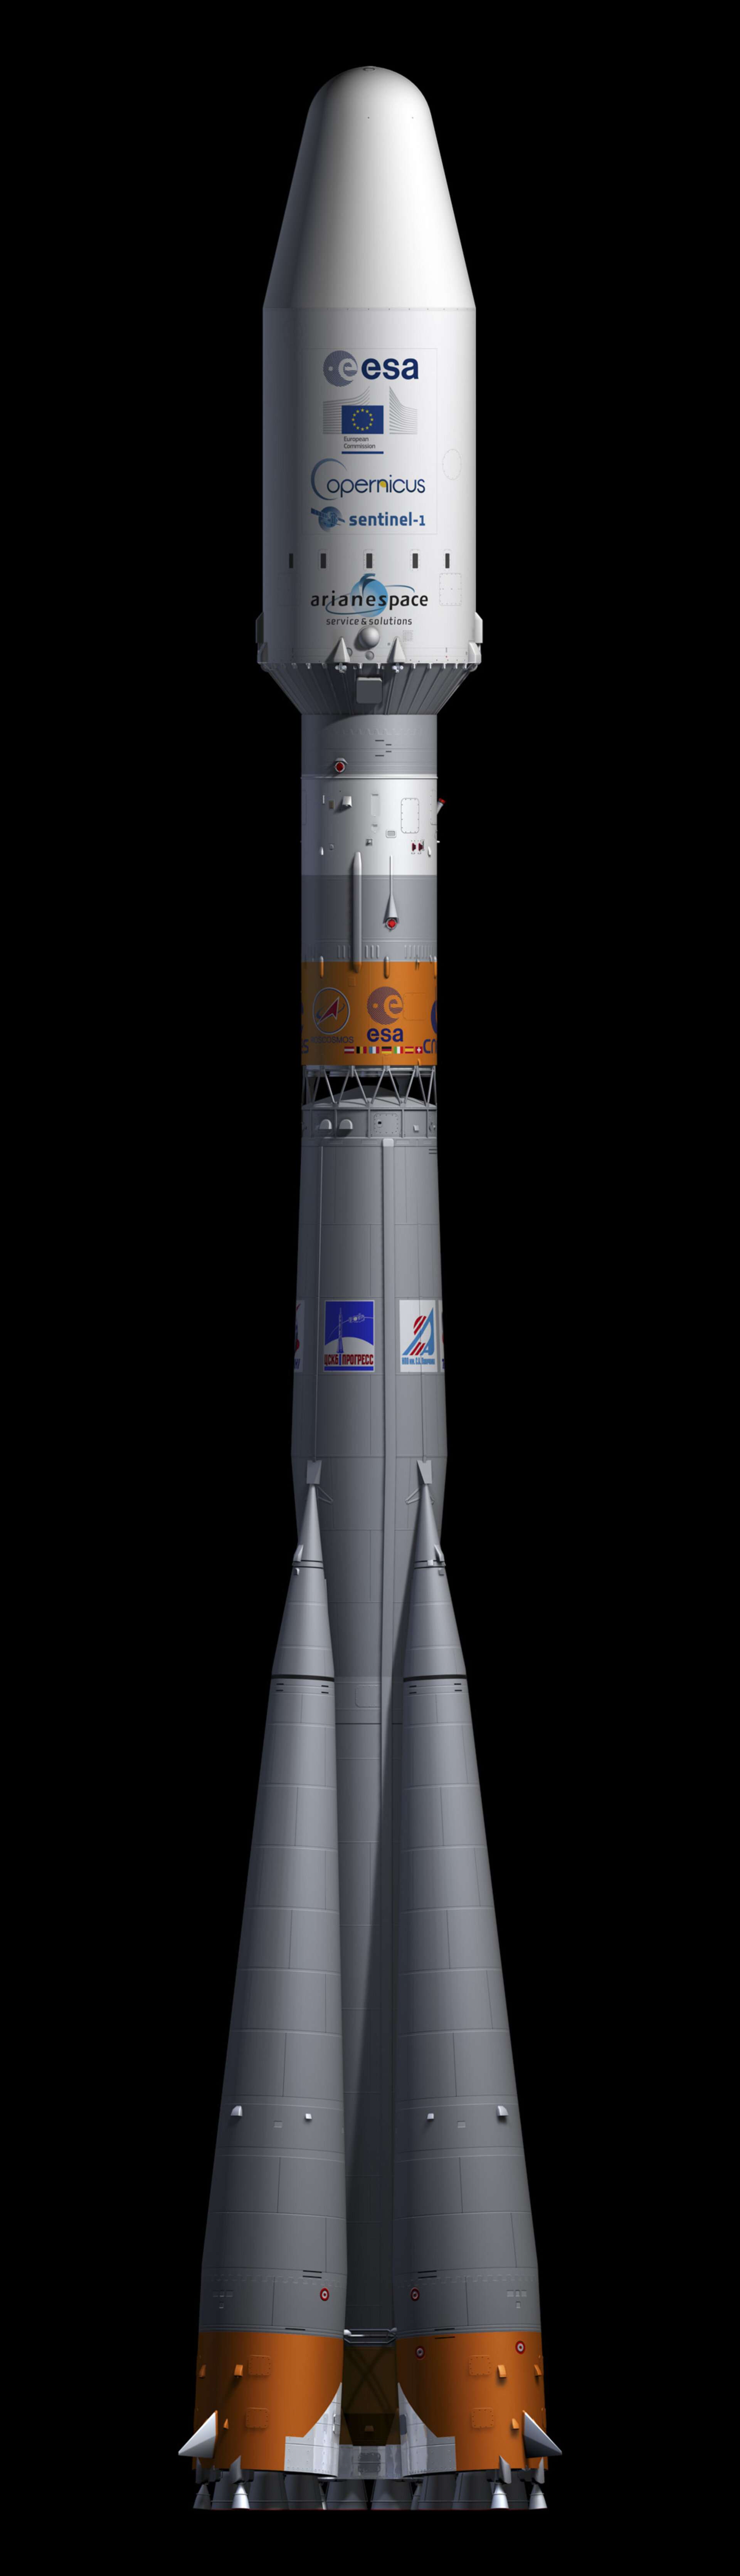 Artist's view of the Soyuz rocket carrying Sentinel-1A satellite